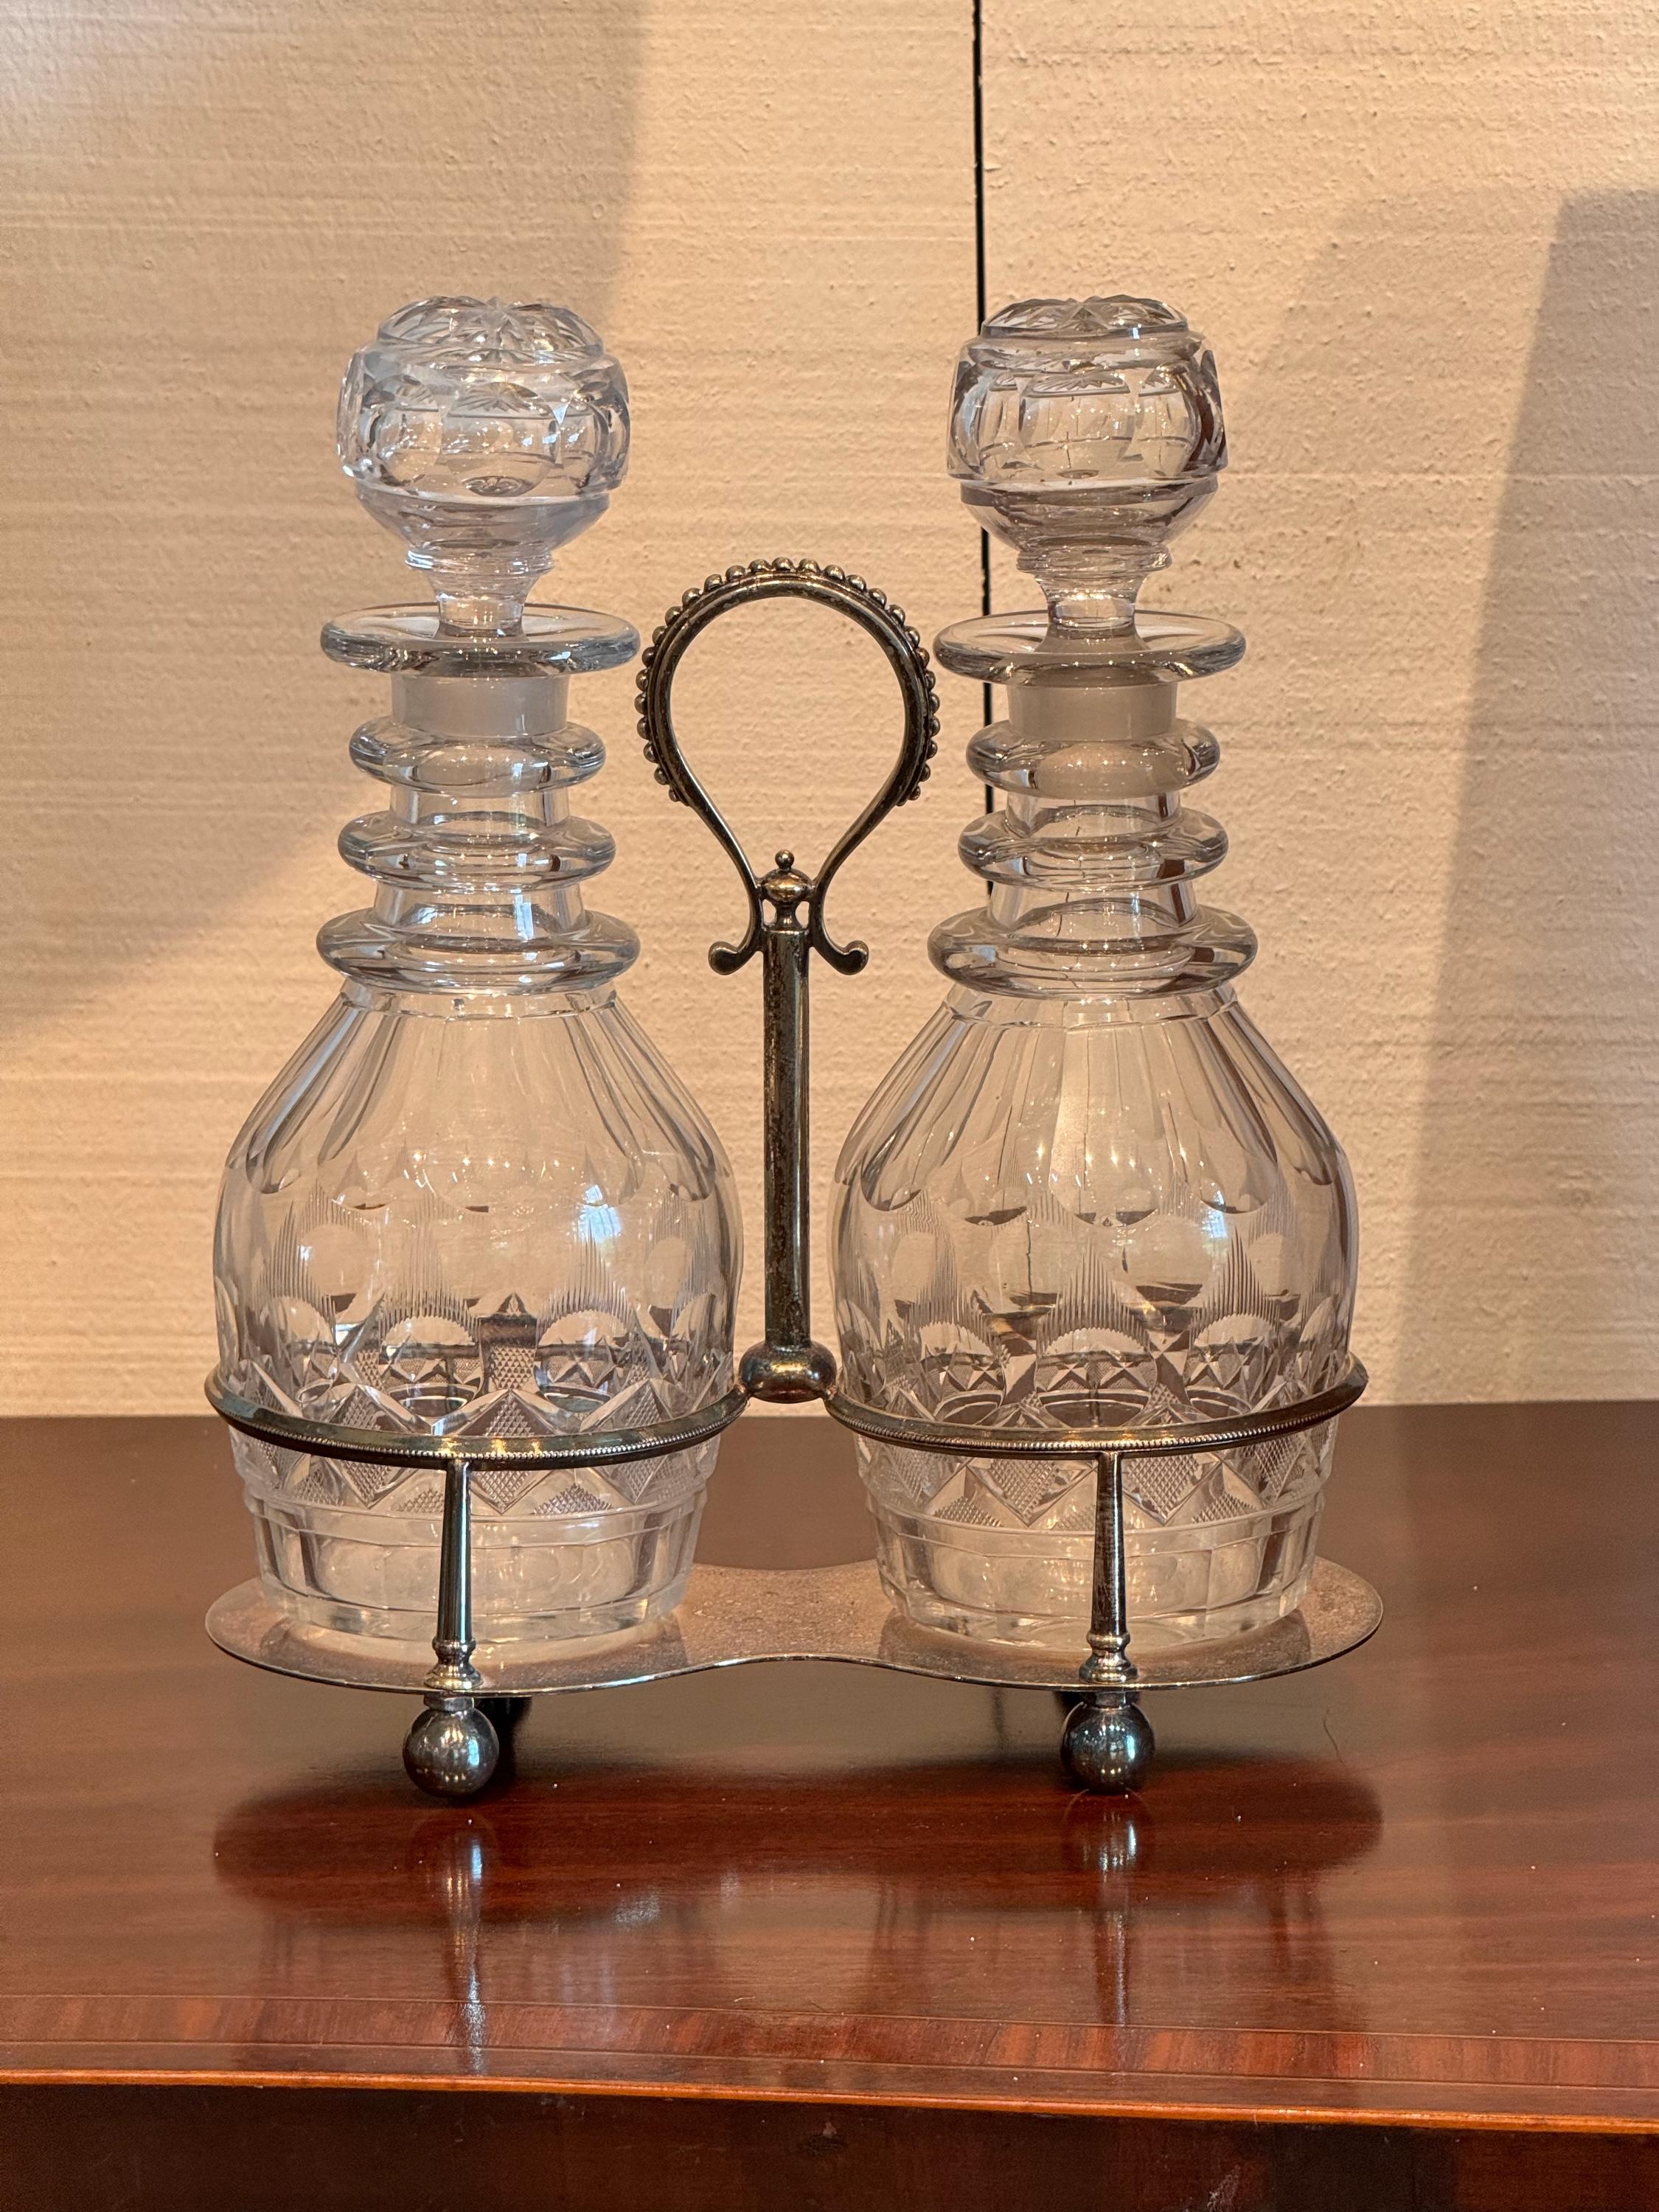 A nice pair of decanters. With silver plate holder.